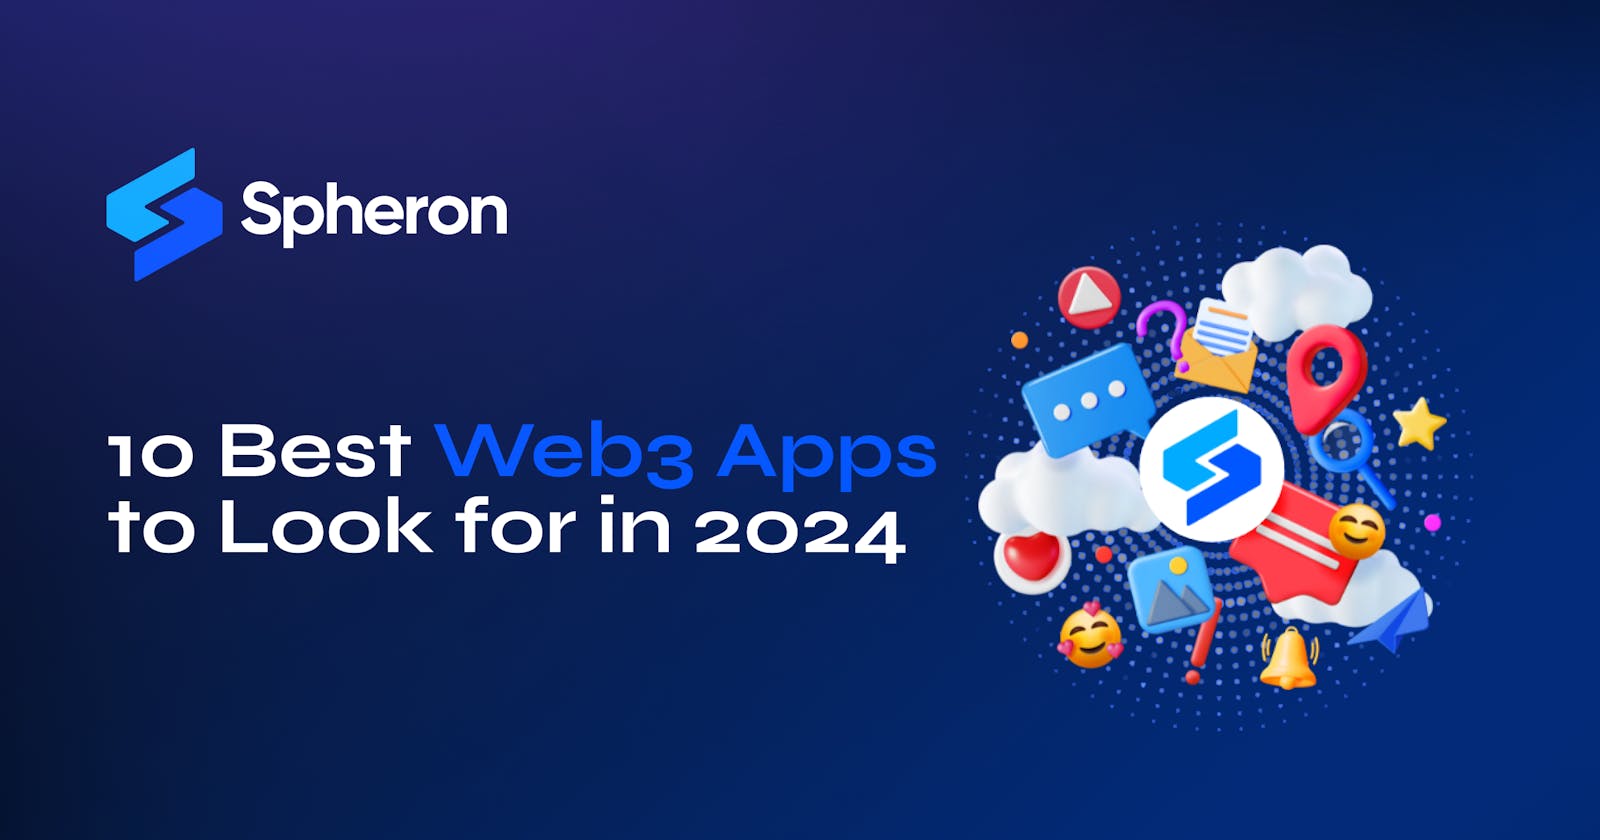 10 Best Web3 Apps to Look for in 2024